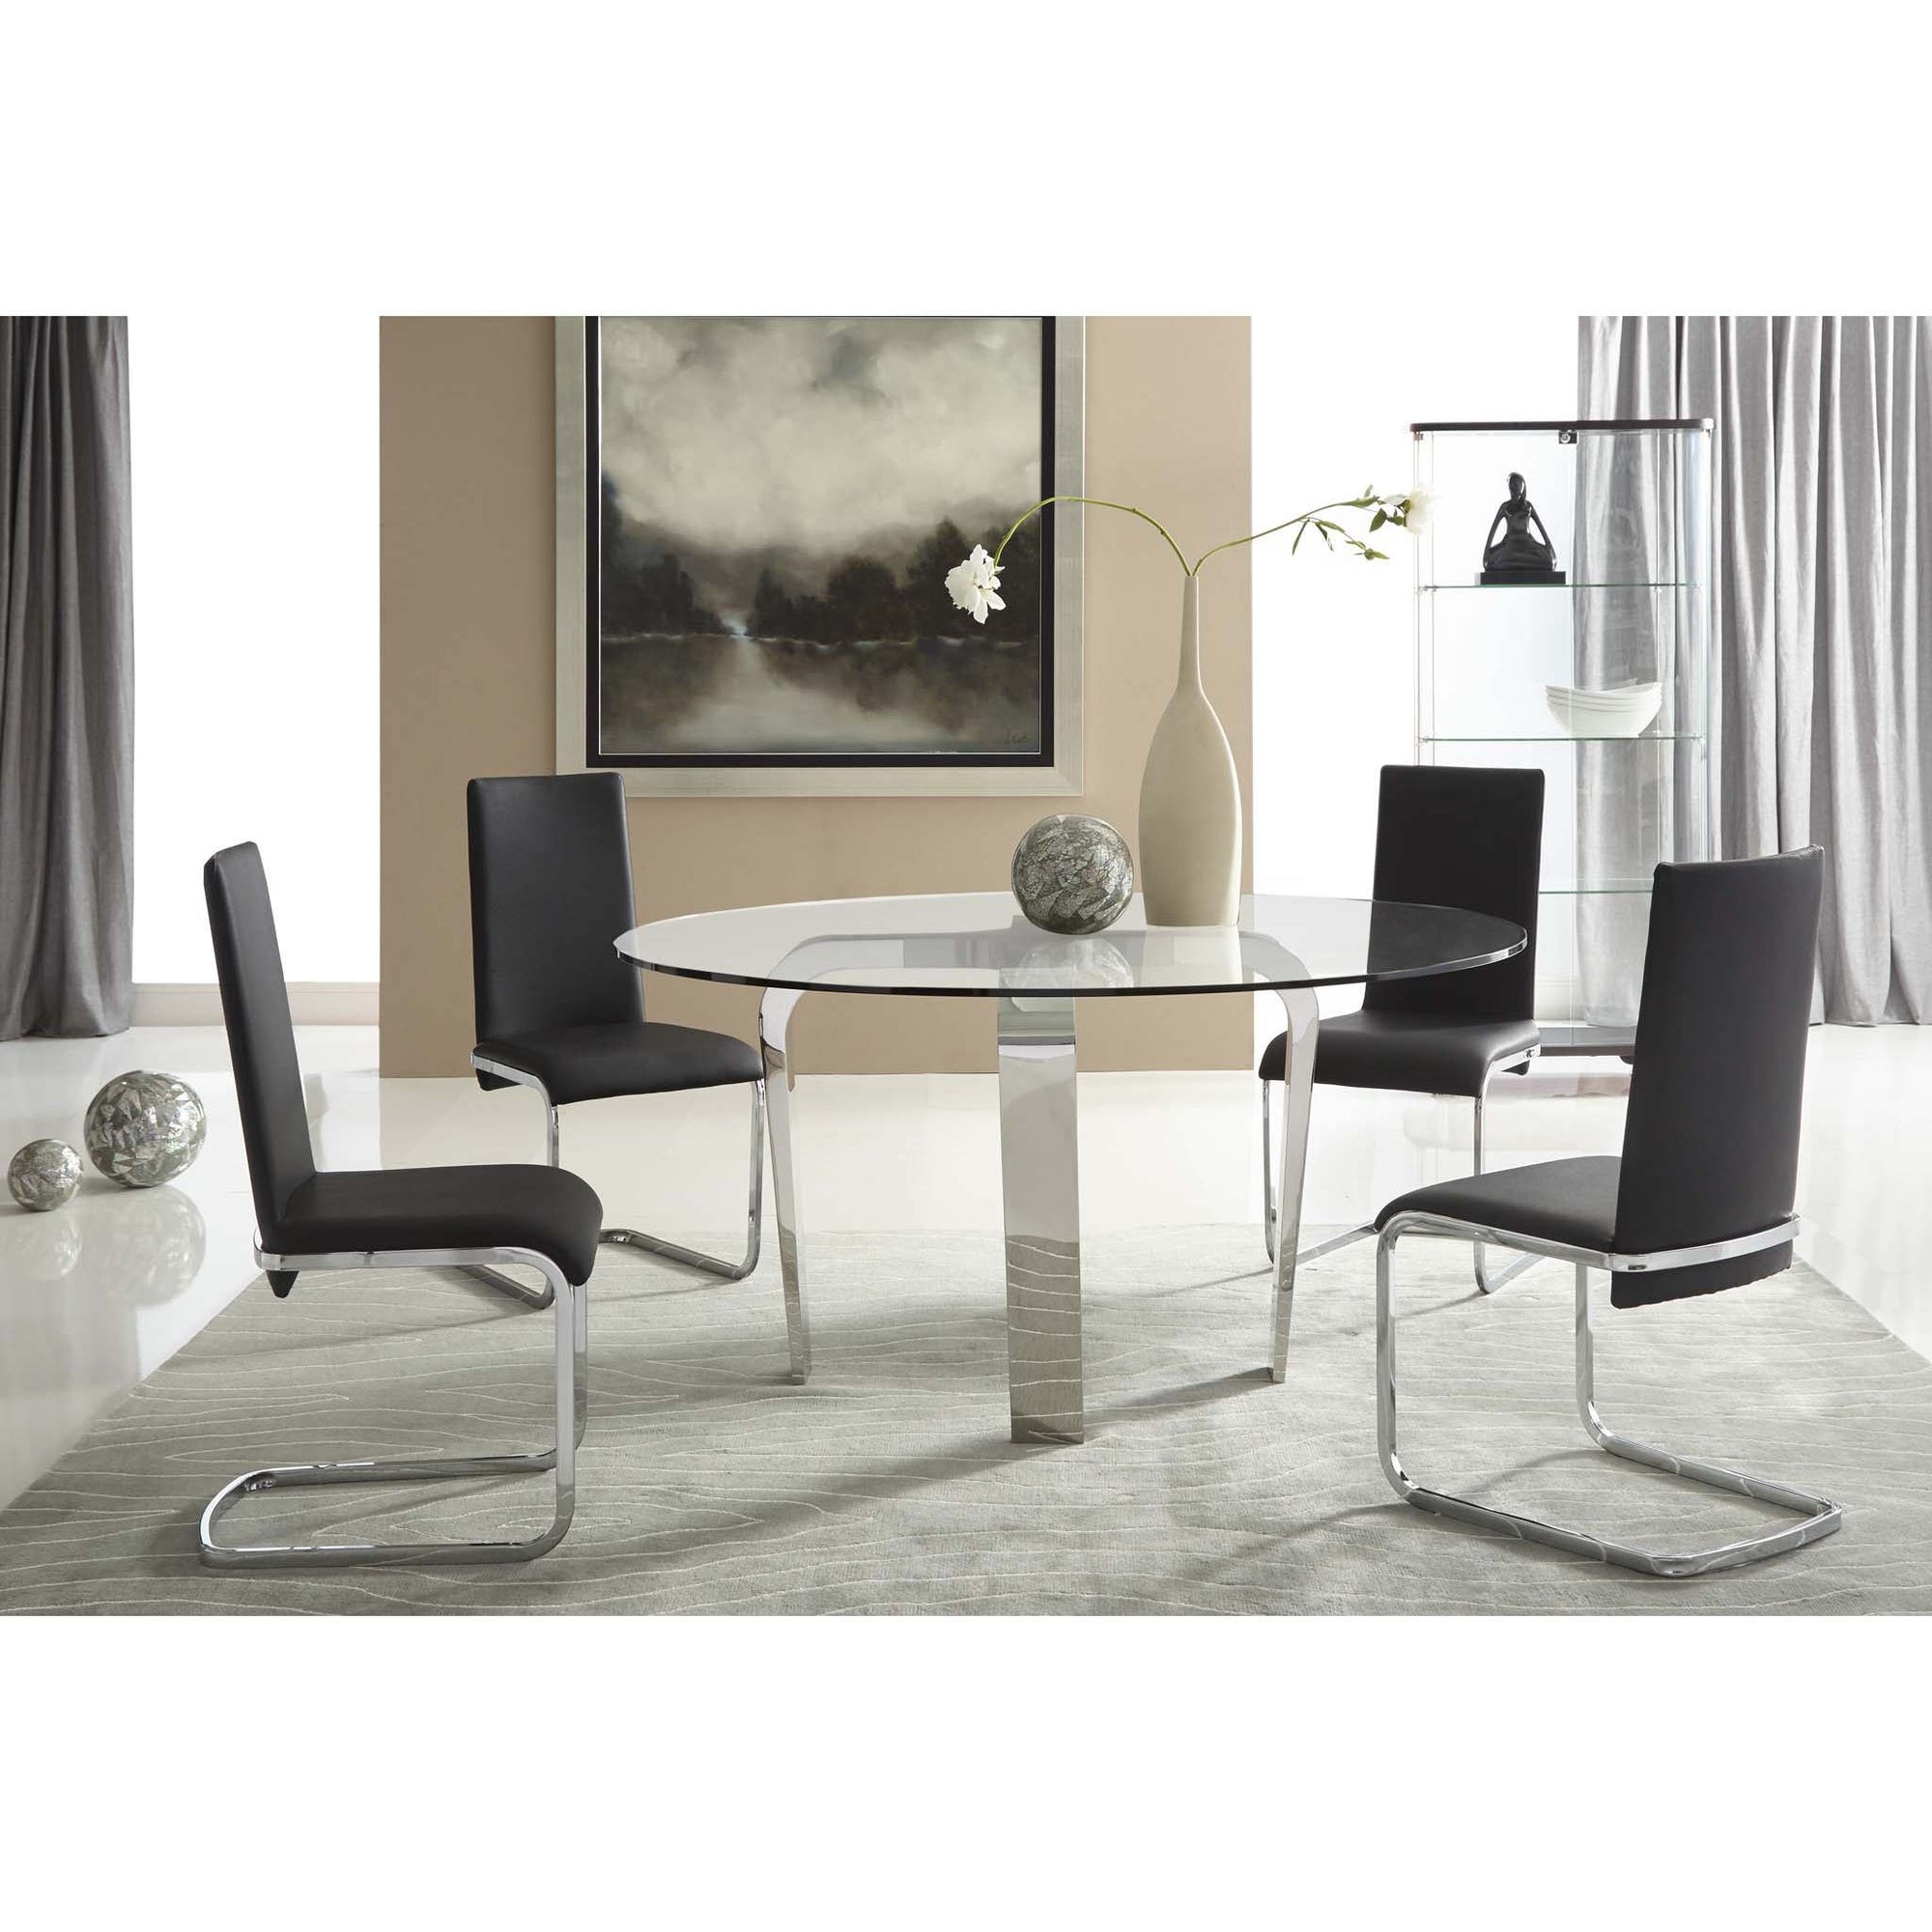 Bellini-Cirrus Round Dining Table-Dining Tables-MODTEMPO